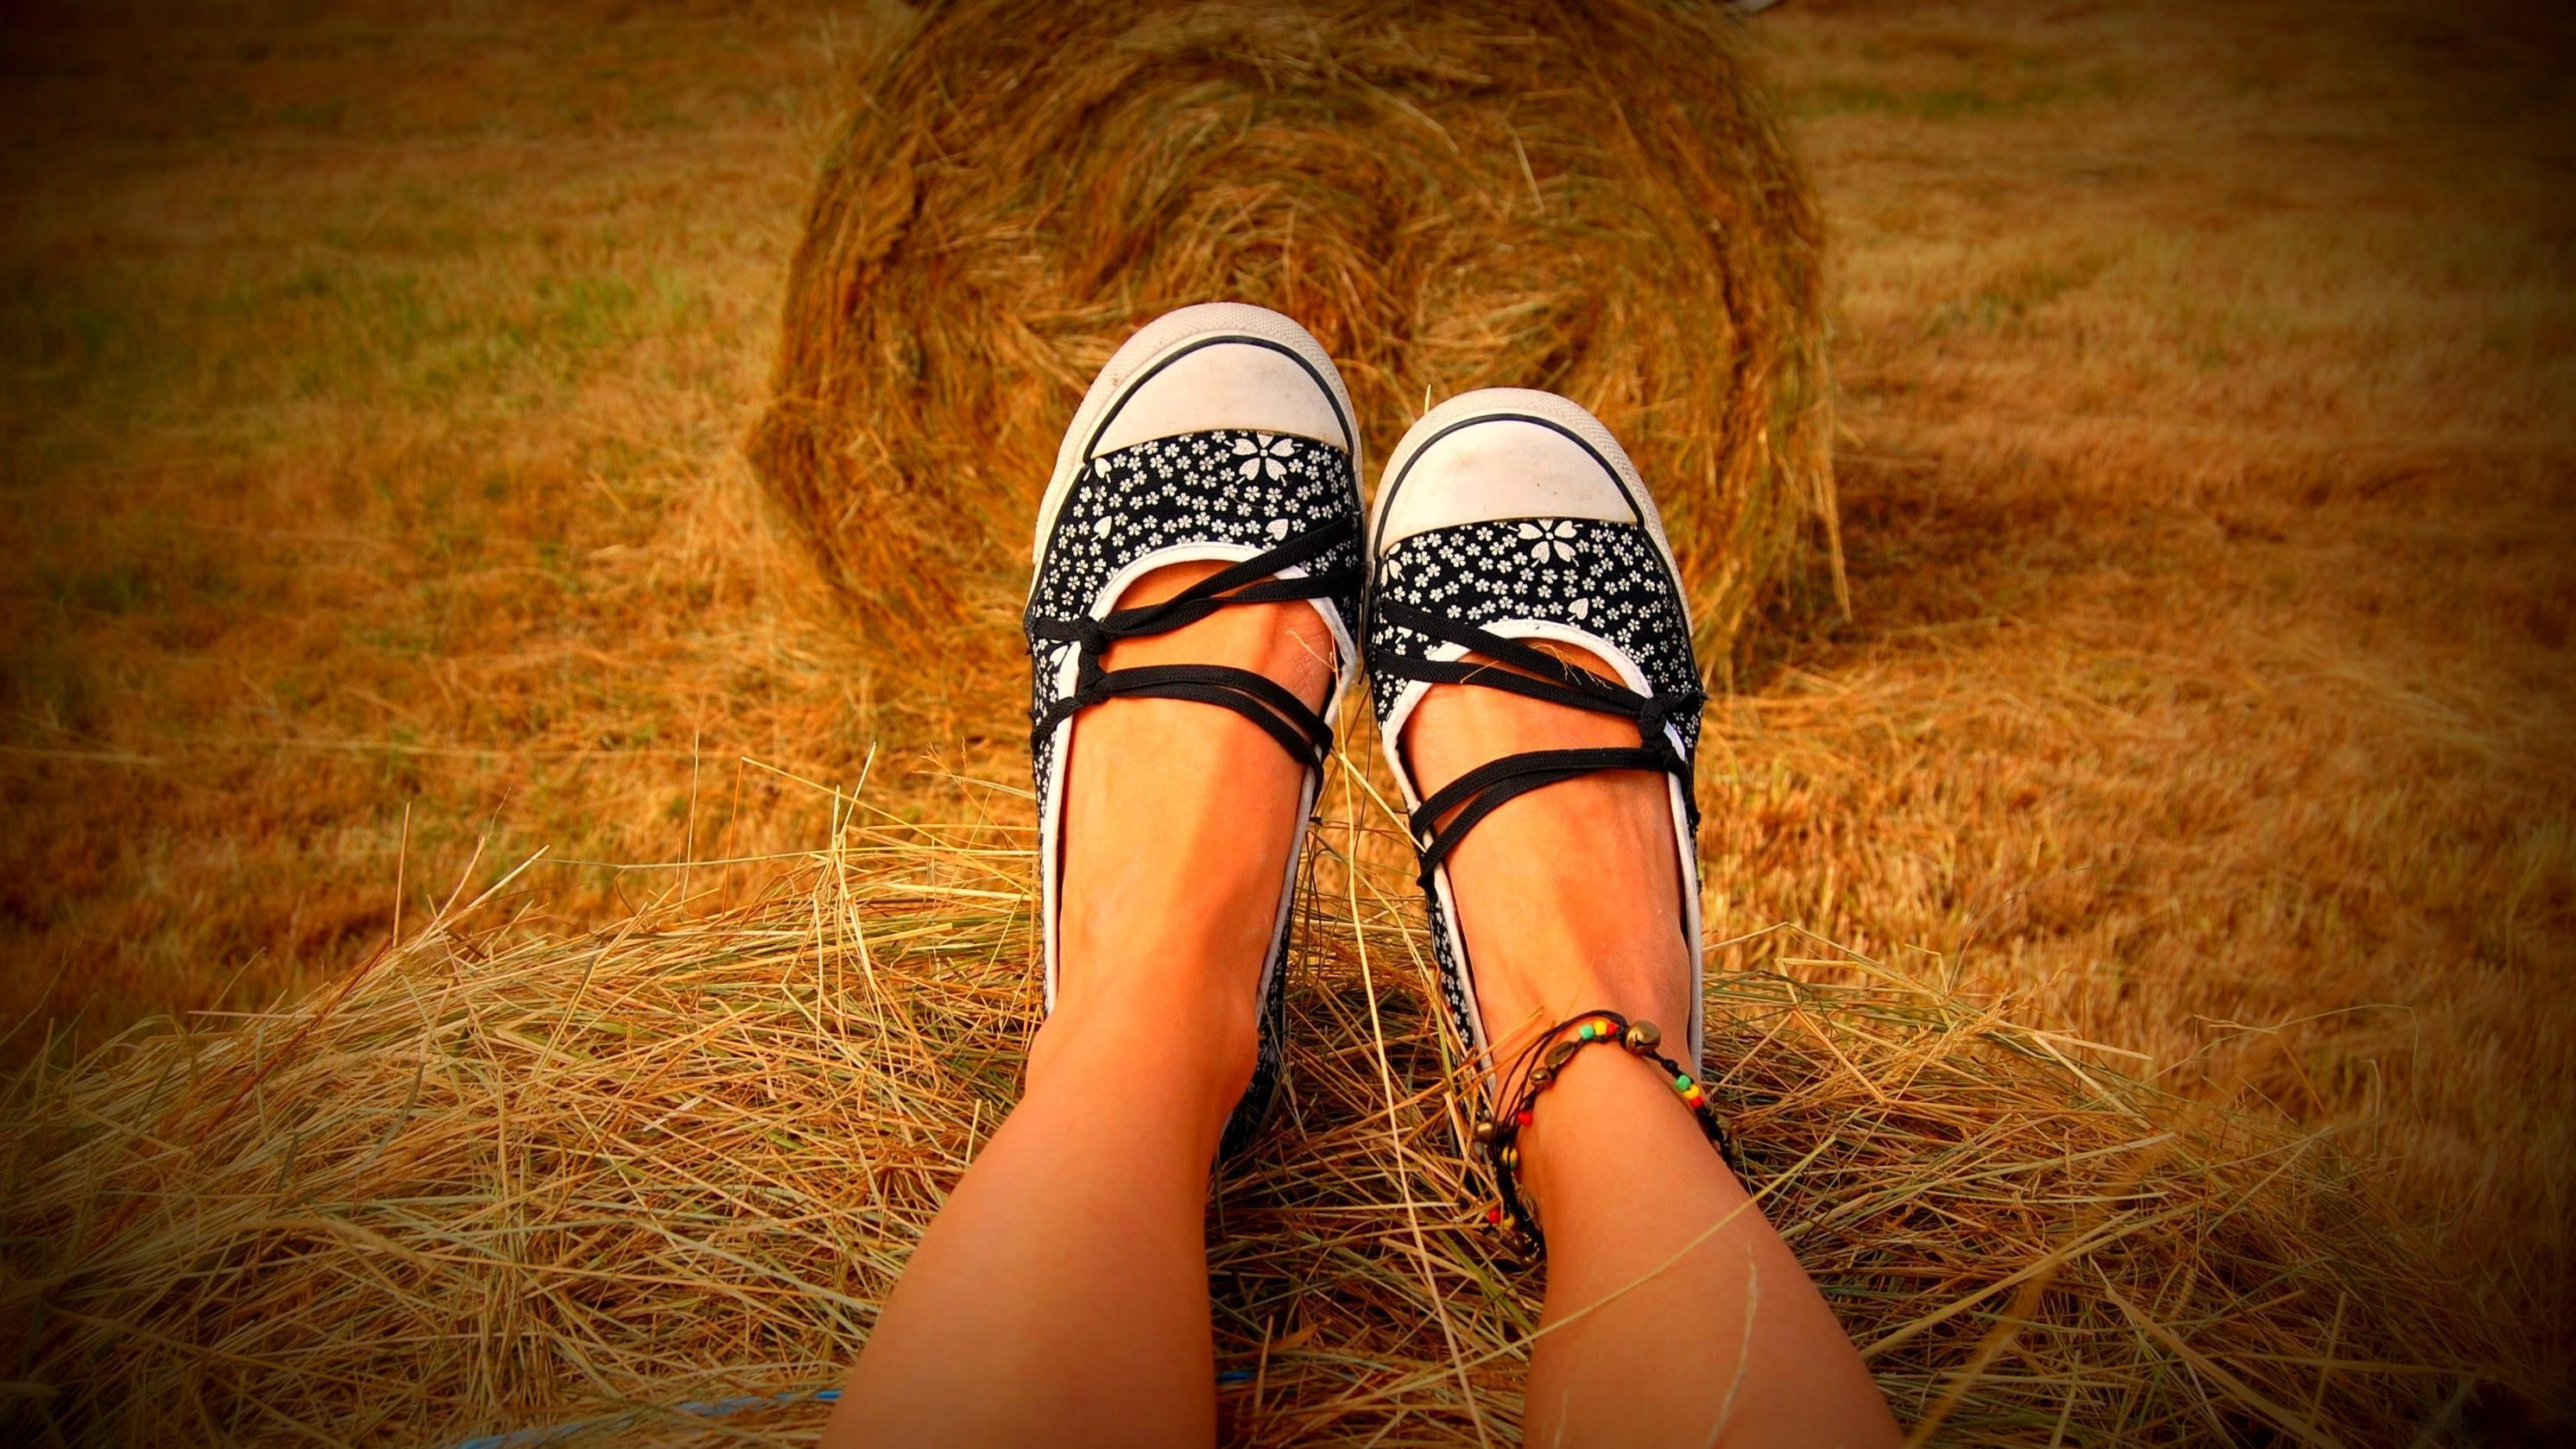 white-and-black leather flat shoes, legs, hay, grass, sit, people